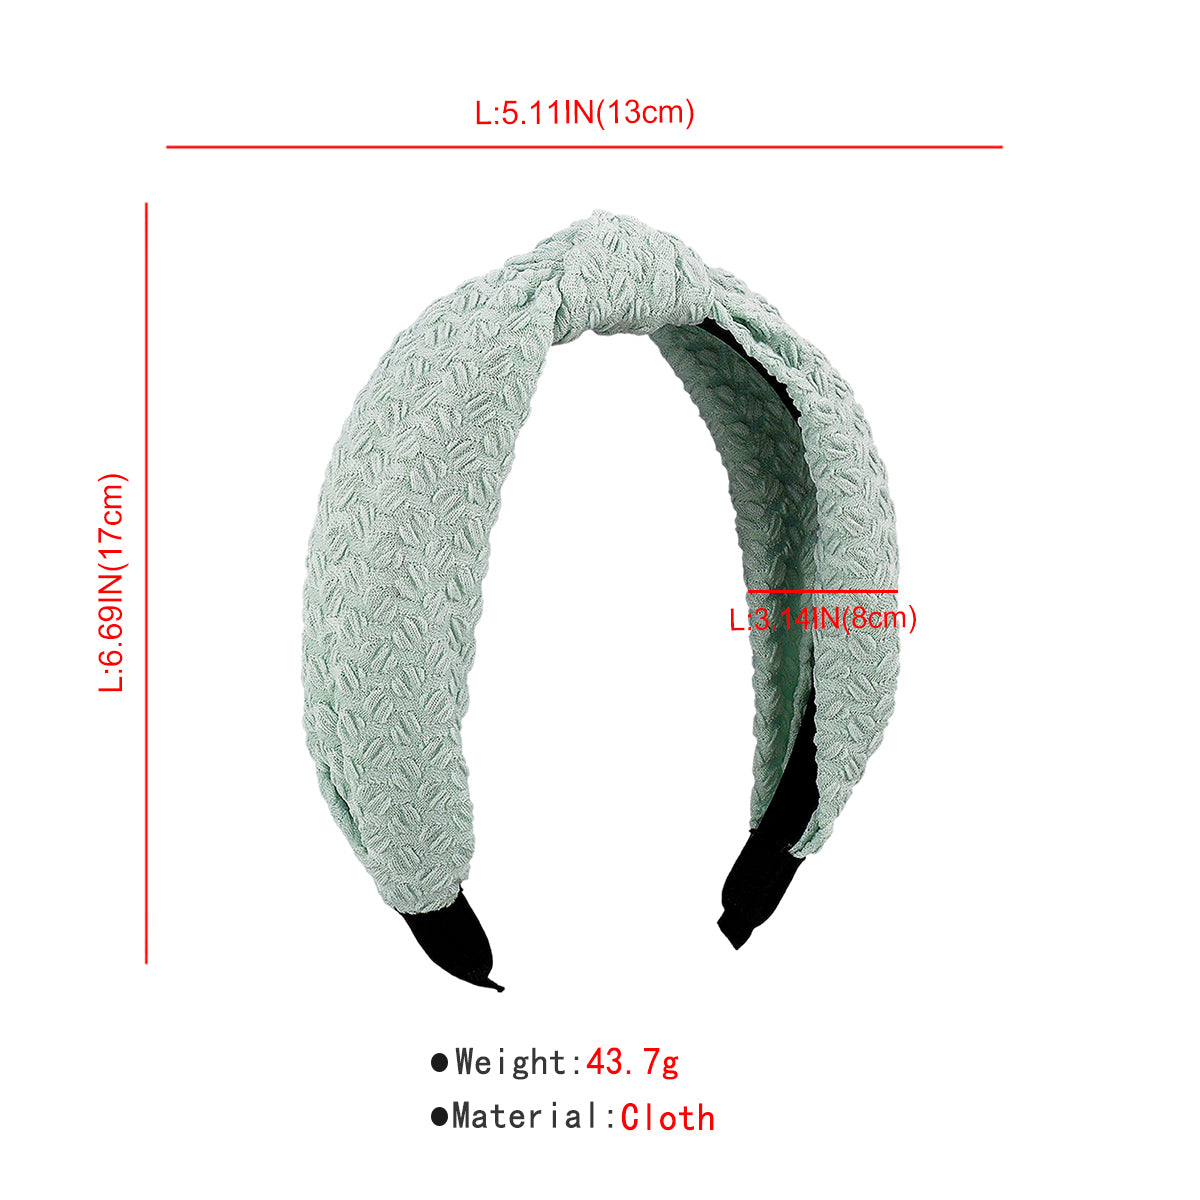 Embossed Top Knotted Headband medyjewelry